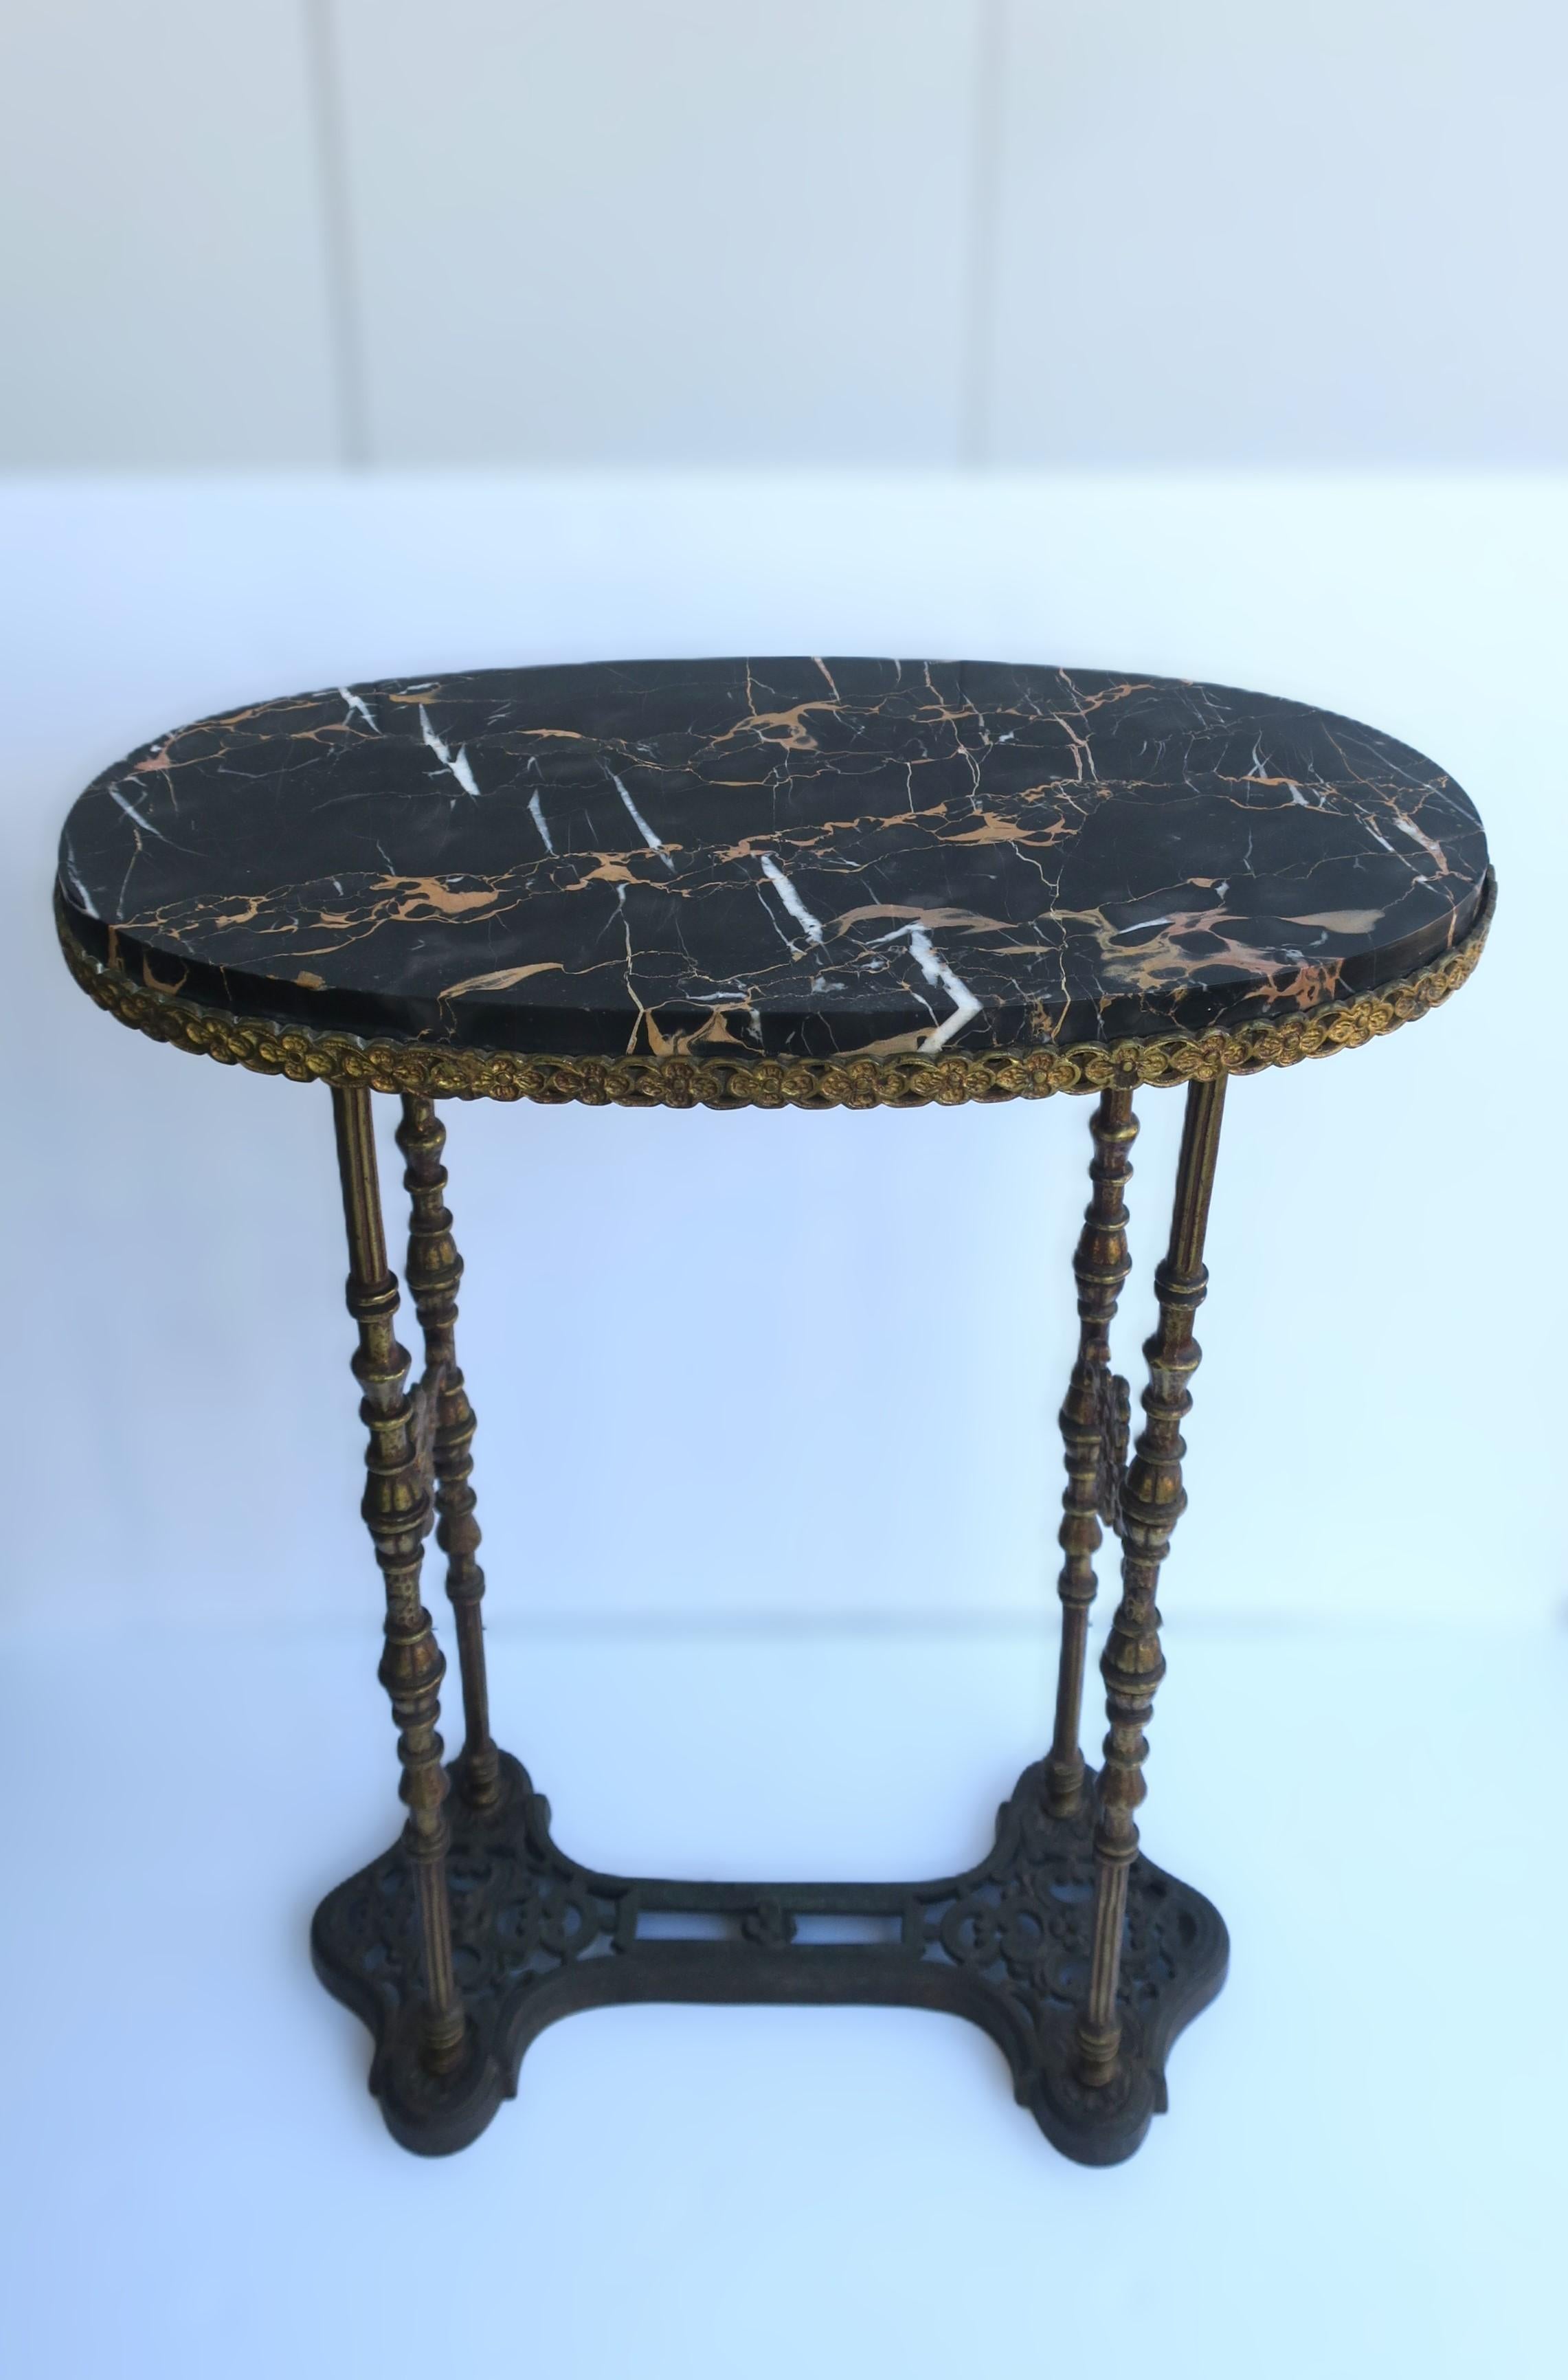 A substantial German oval marble console table with a black 'Porto' marble top and gold gilt brass or bronze base, circa early-20th century, Germany. Table has an oval marble top embraced by a gold gilt frame. Marble top is attached to frame. Table